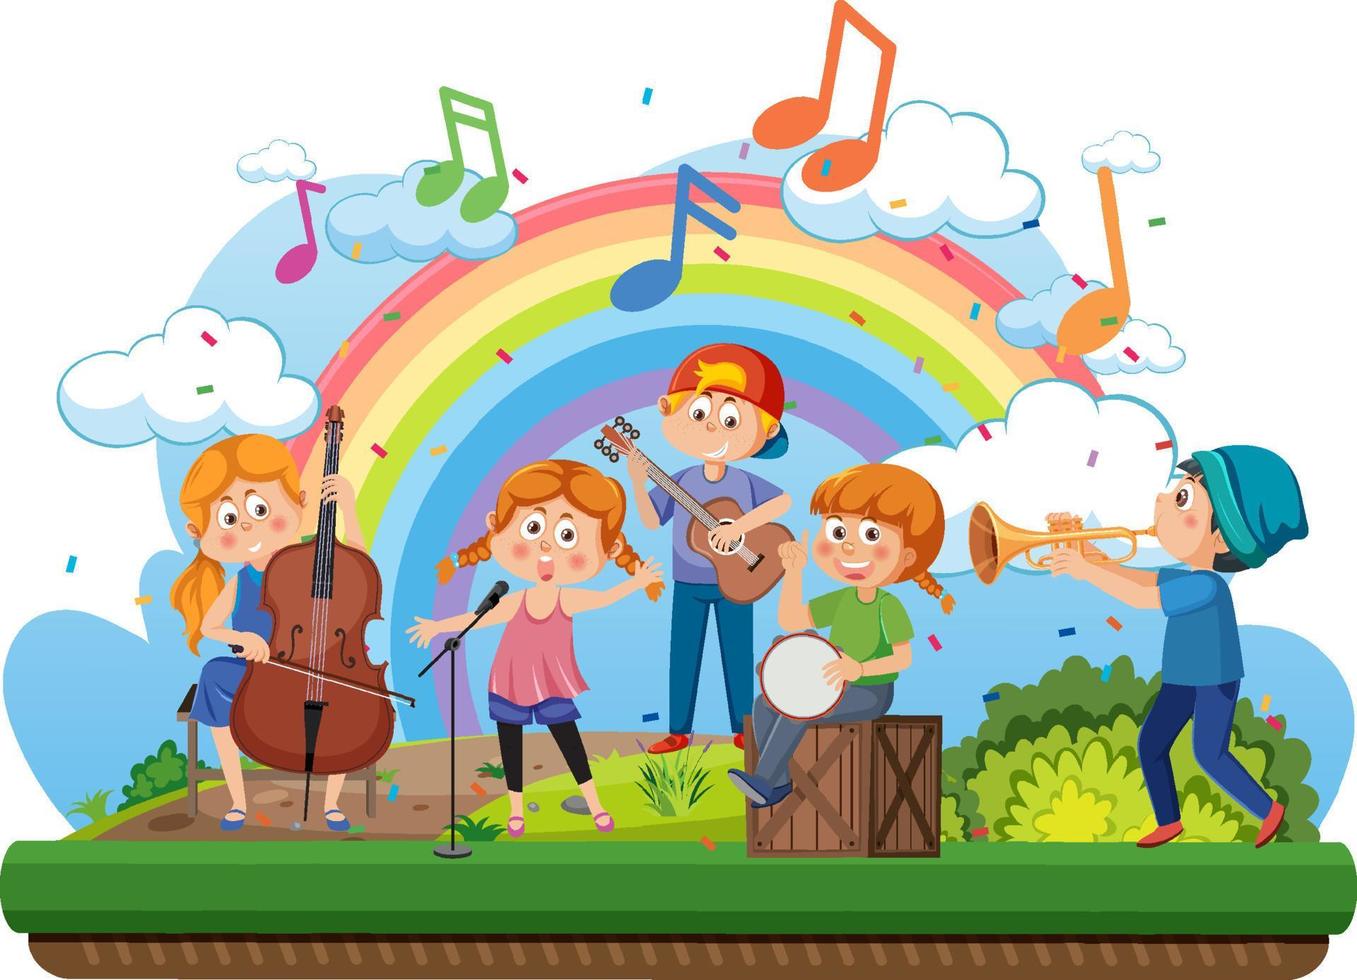 Children playing music at park vector